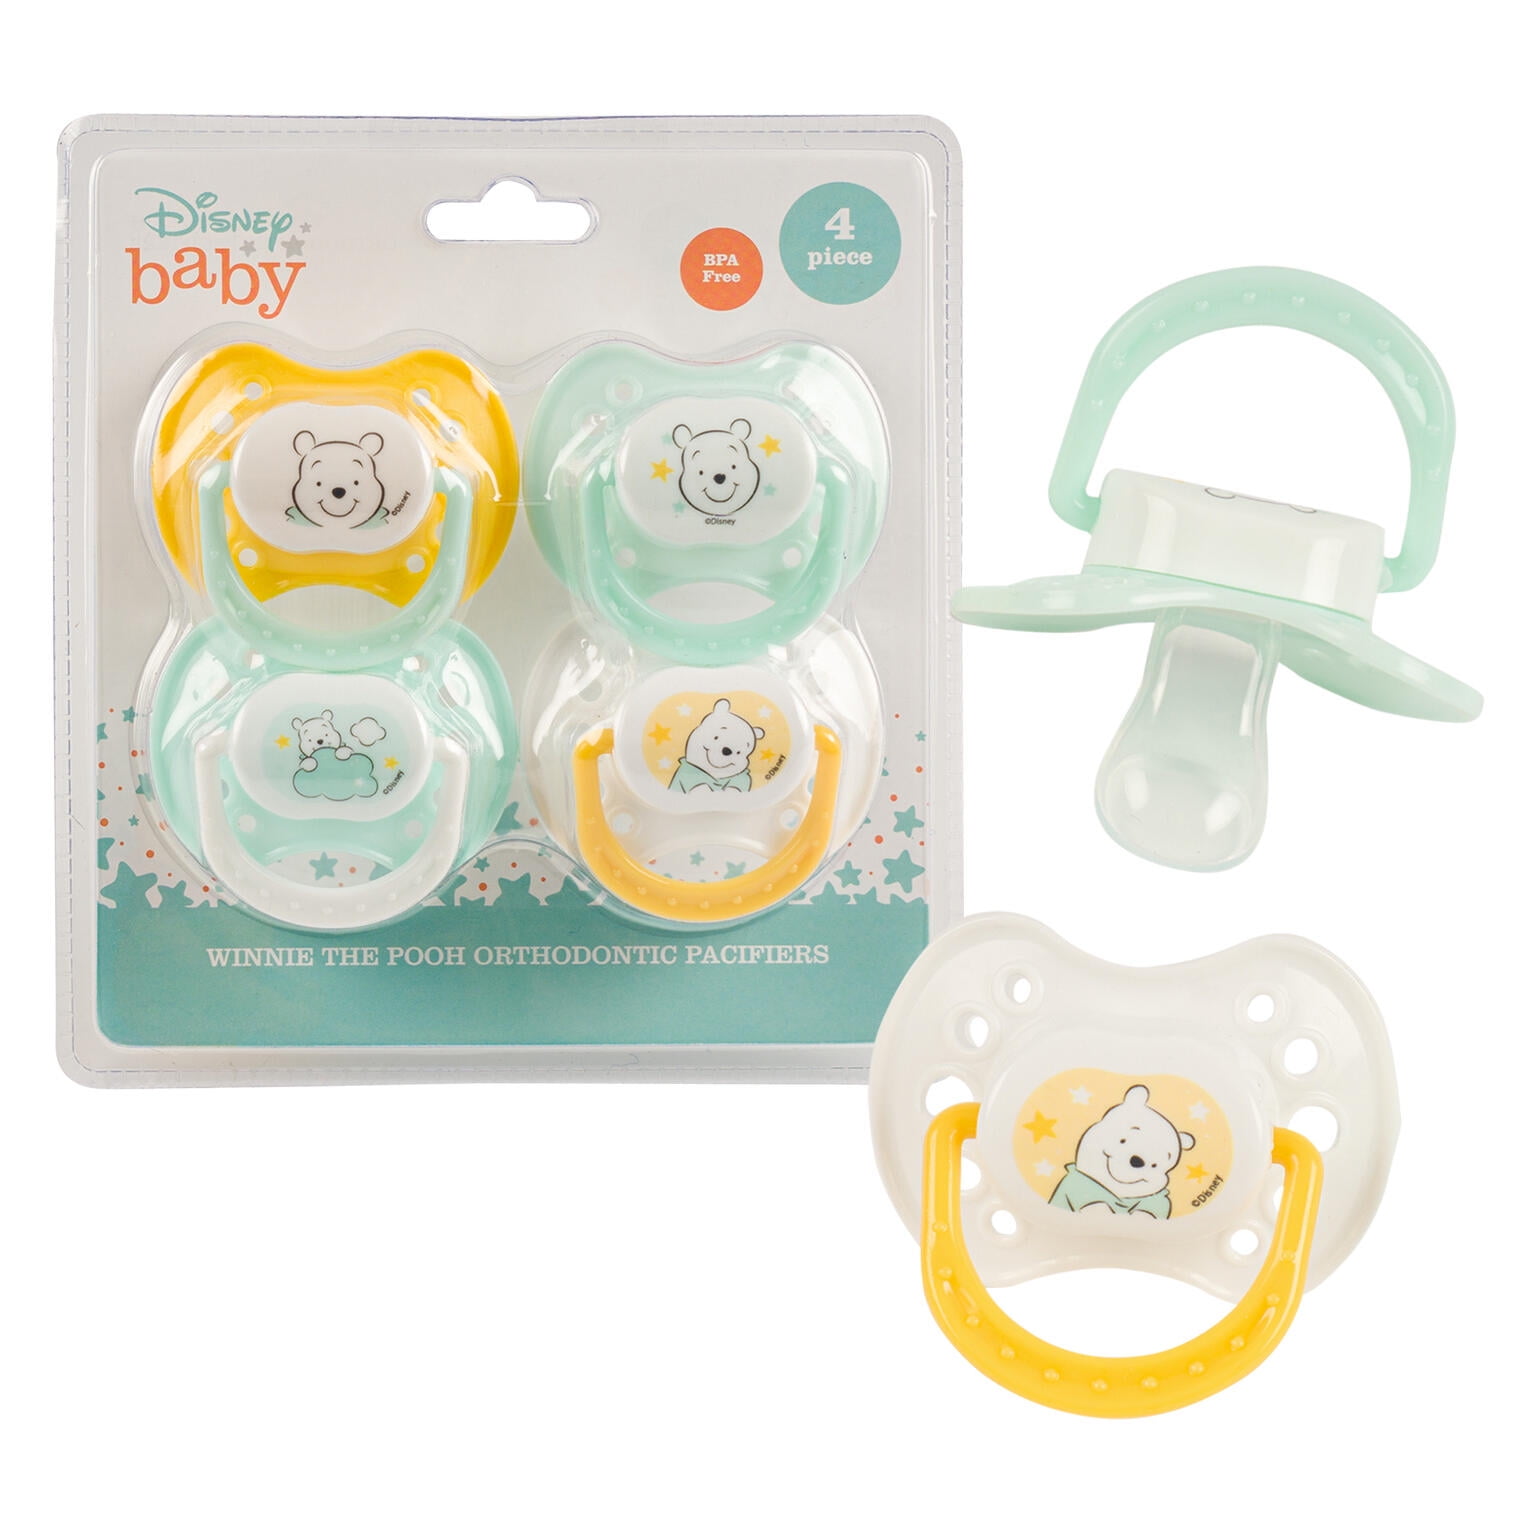 Tigex Pacifiers 6-18 months Winnie the Pooh